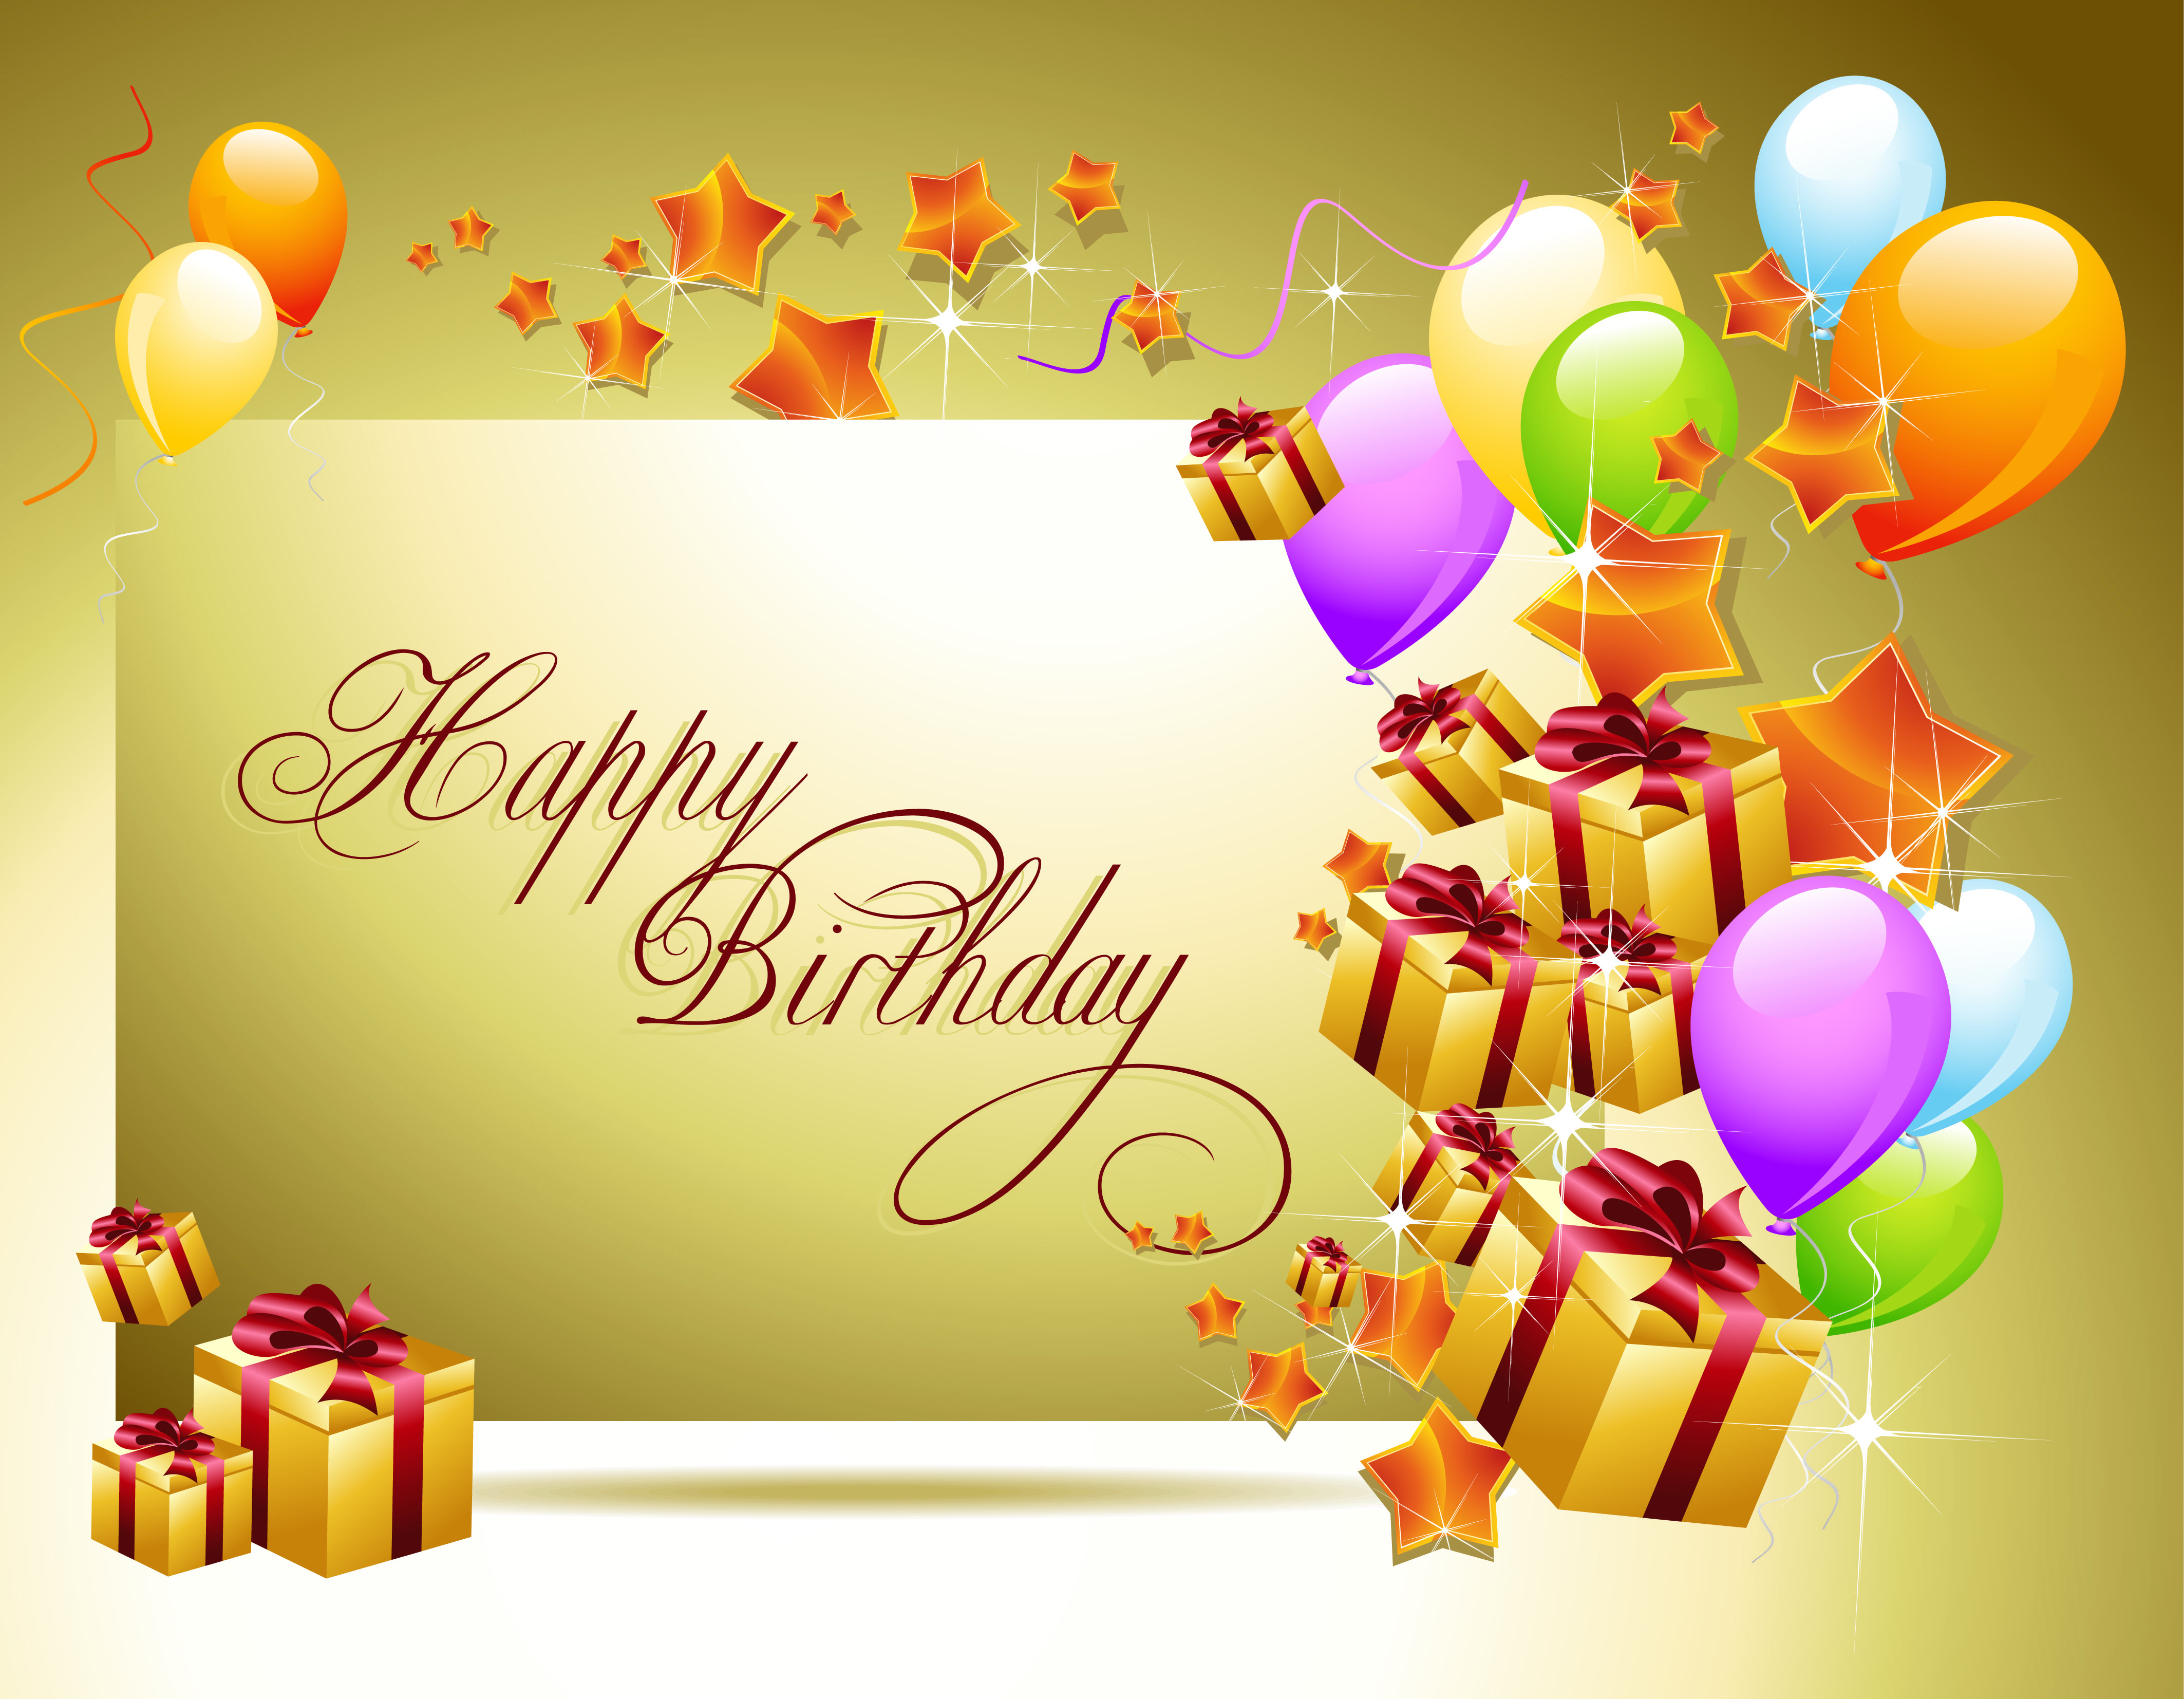 BirtHDay Golden Background Wallpaper And Image